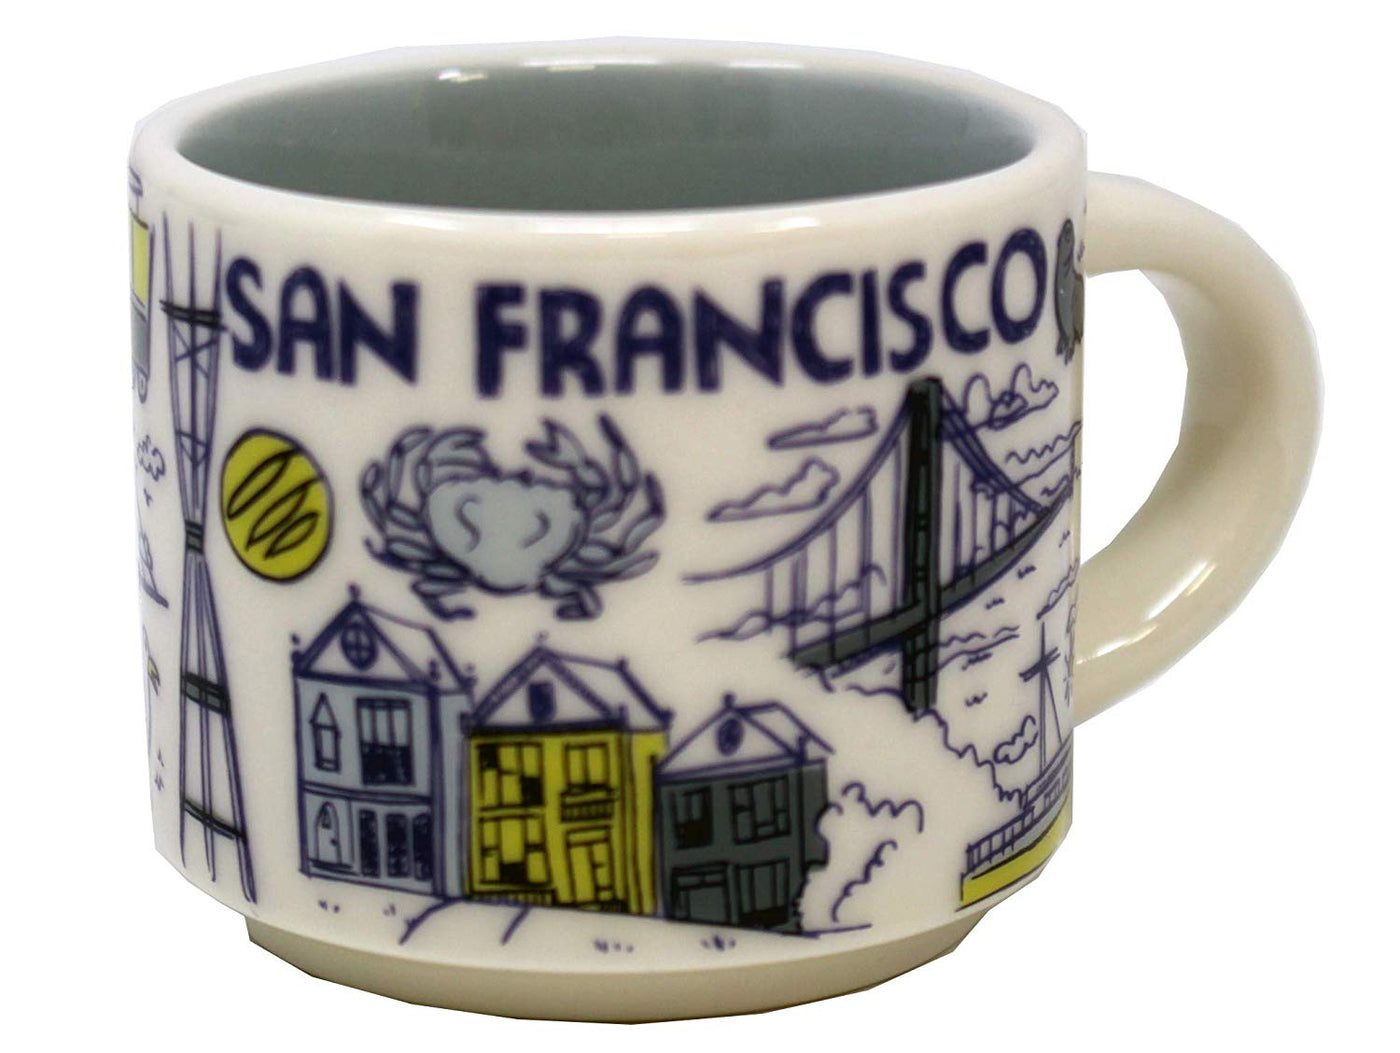 Starbucks Been There Collection San Francisco California Coffee Mug New with Box